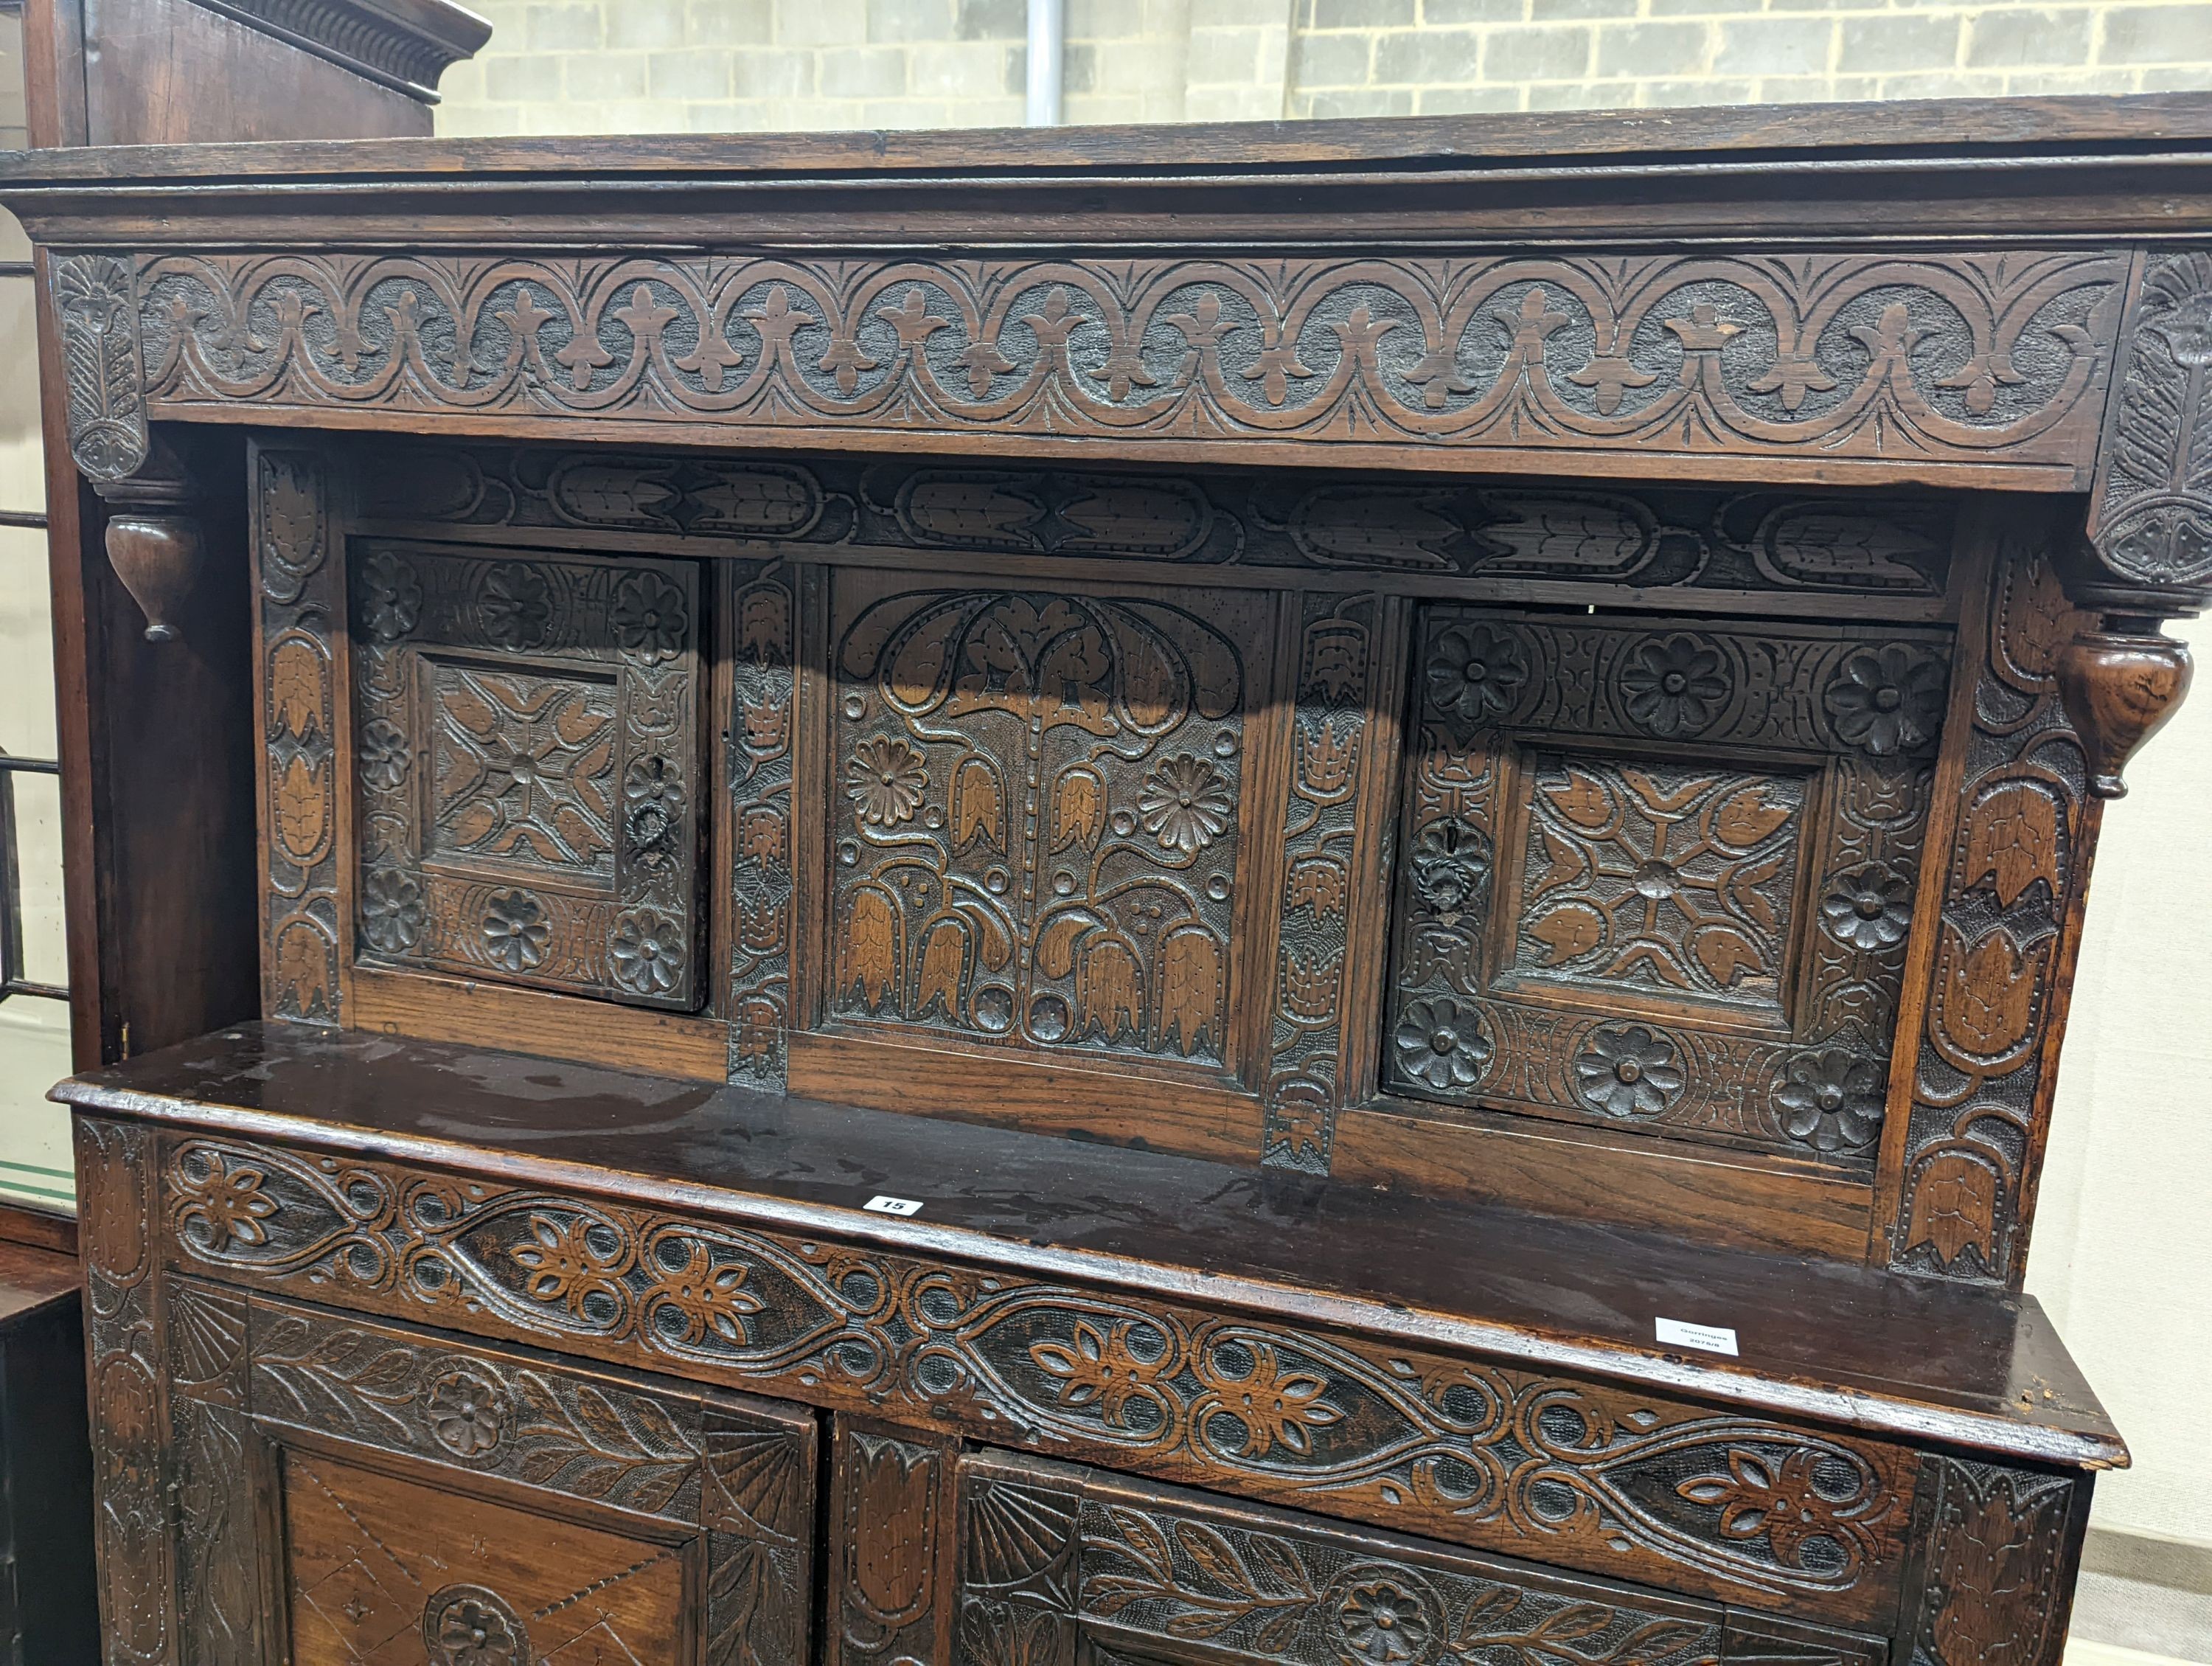 A 17th century and later oak court cupboard, width 129cm, depth 50cm, height 180cm